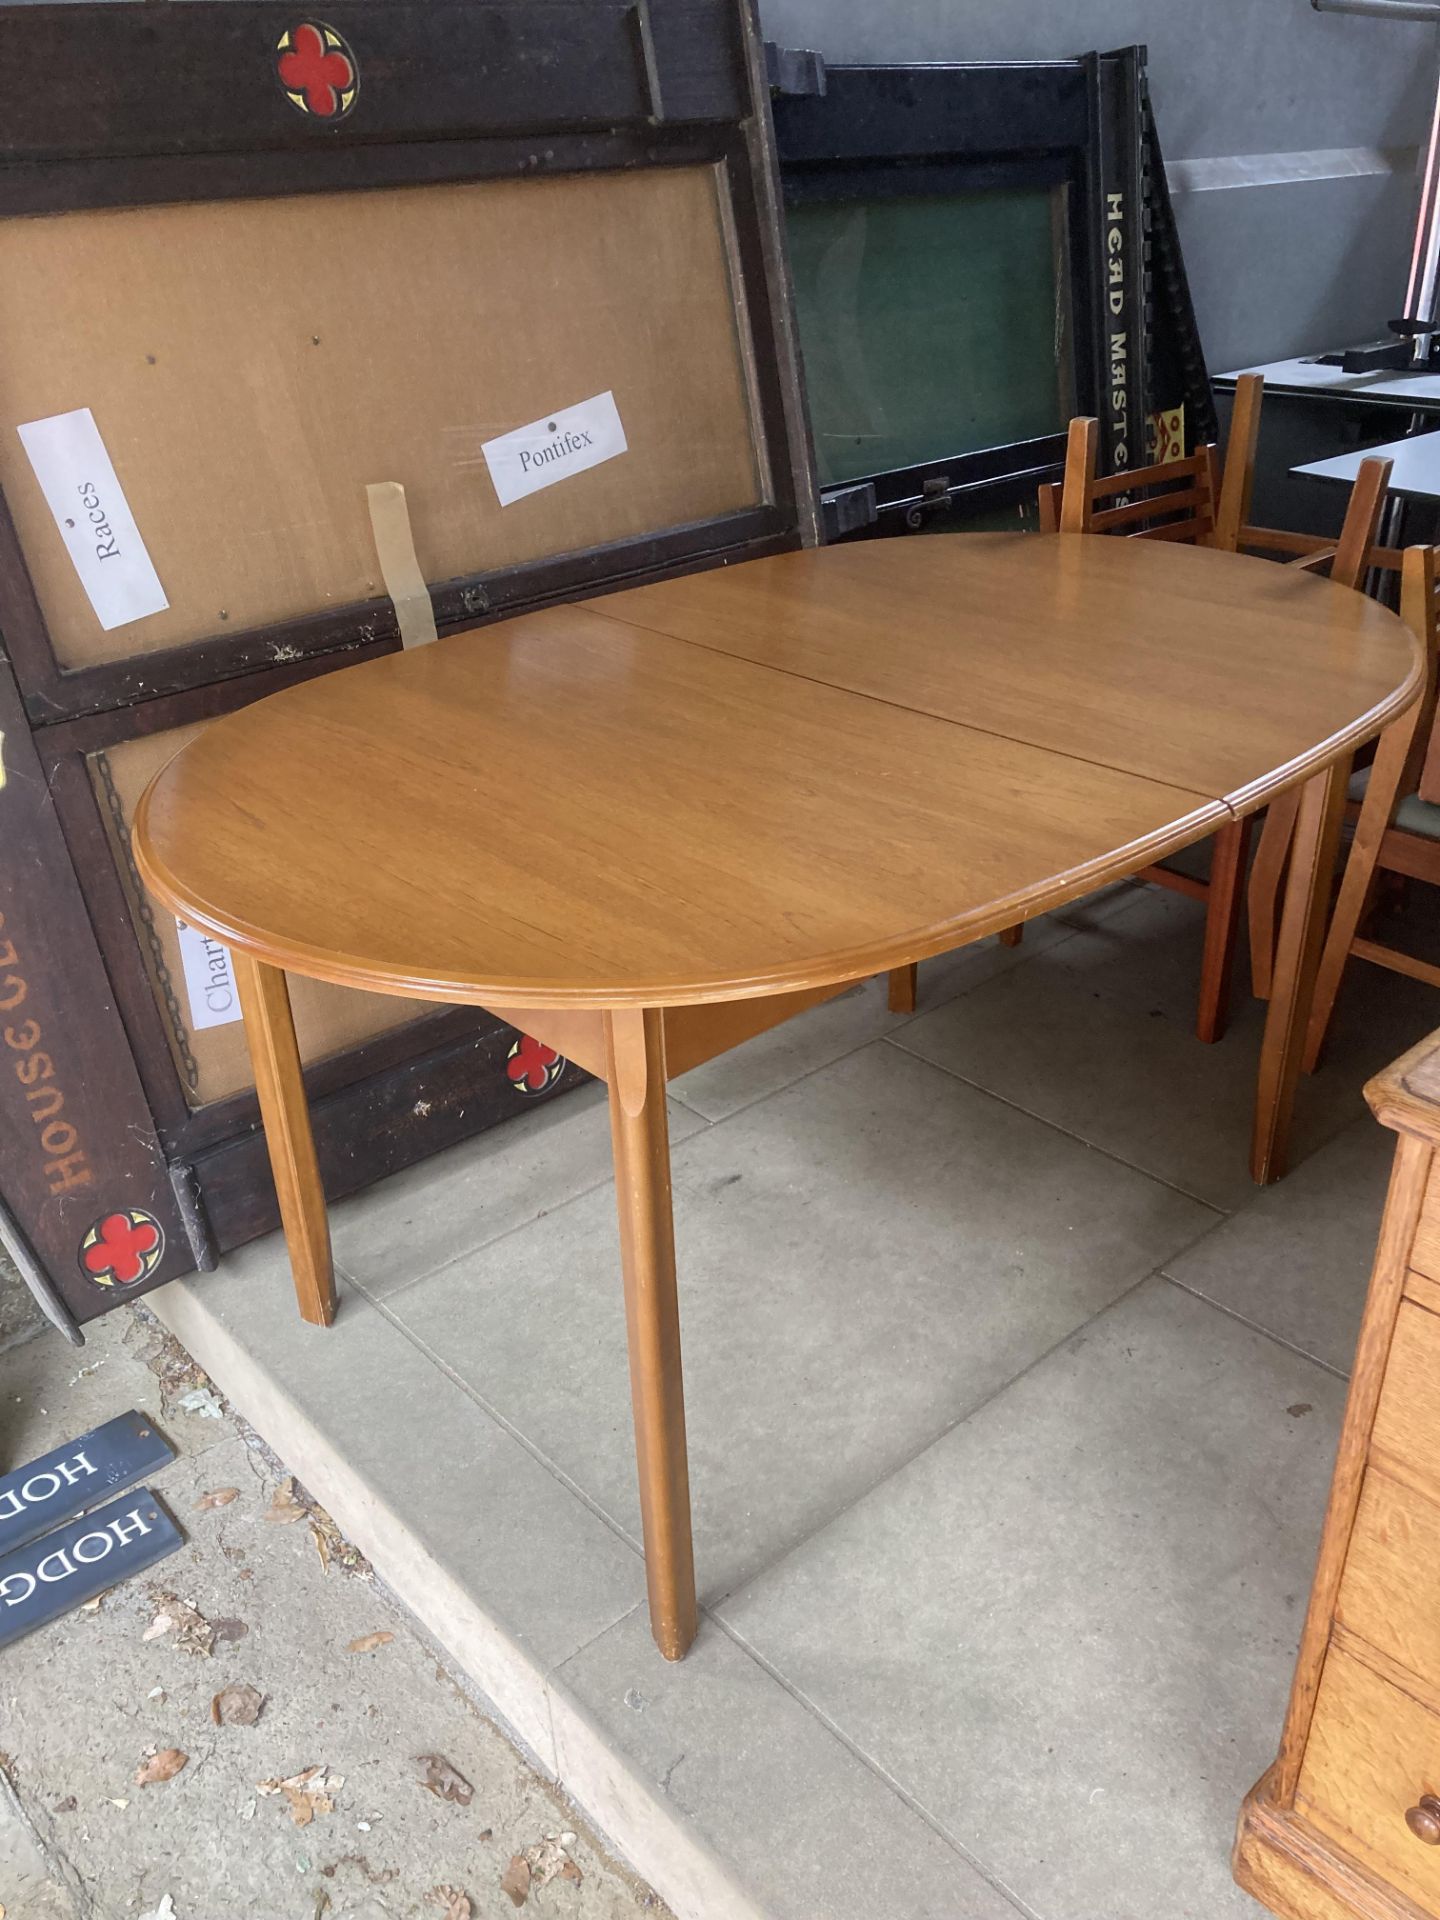 *EXTENDABLE DINING TABLE WITH FOUR CHAIRS AND CENTRAL LEAF - CLOSED LENGTH 145CM